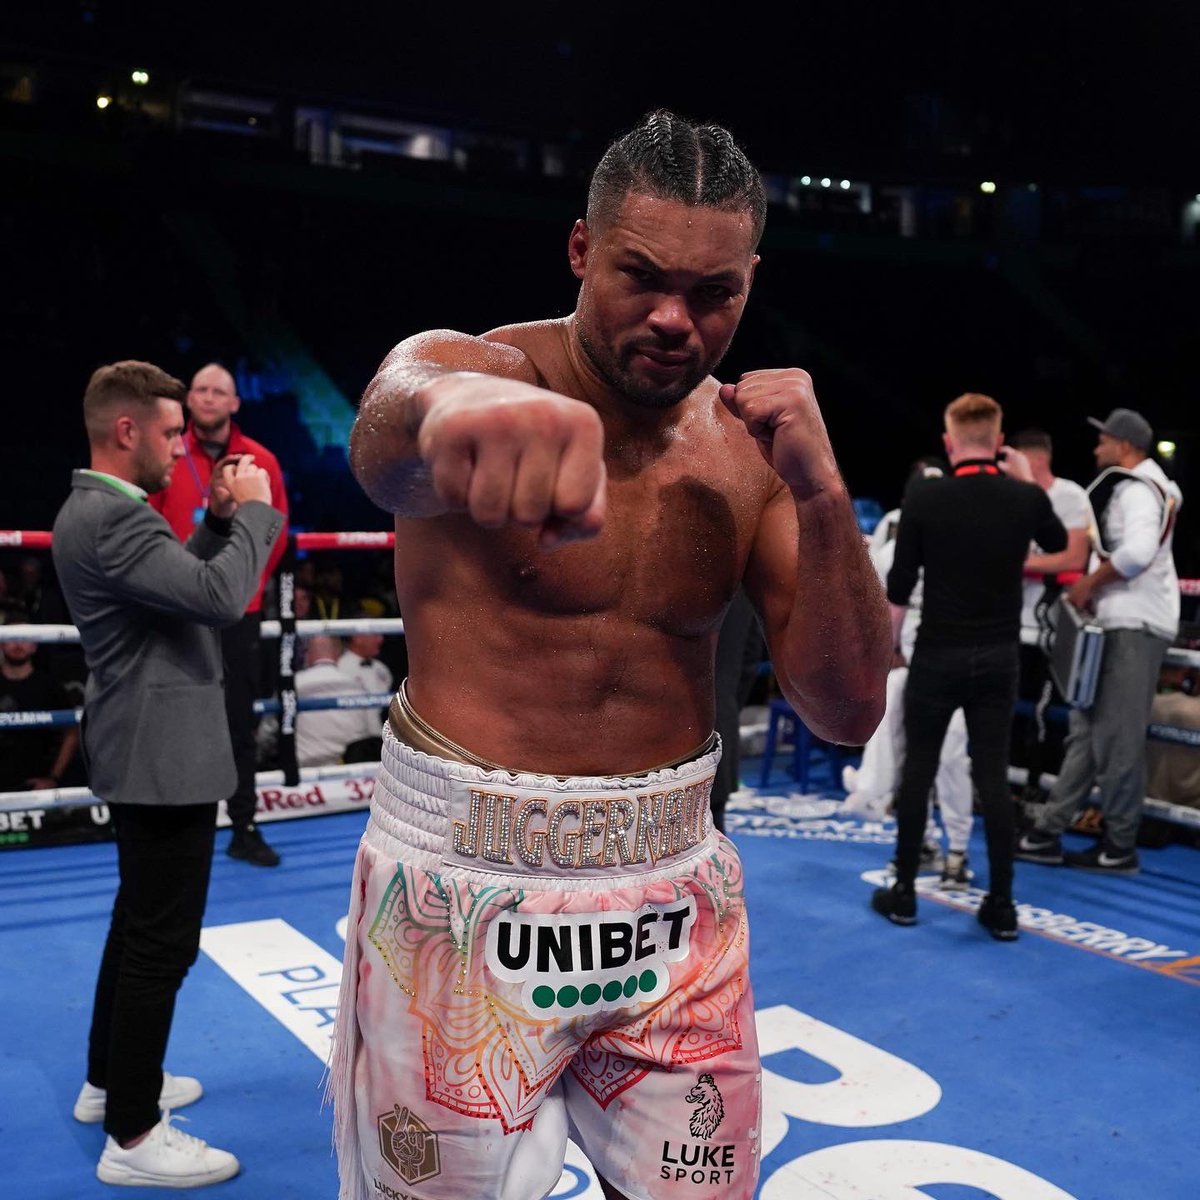 I really enjoyed that, Great Fight!
Huge respect to @joeboxerparker!
I have proven I’m up there with the best in the world and now I’m on the way to some huge fights!
Bring on Usyk or Fury if he wants a war The Juggernaut! 
#THEJUGGERNAUT 👊🏾